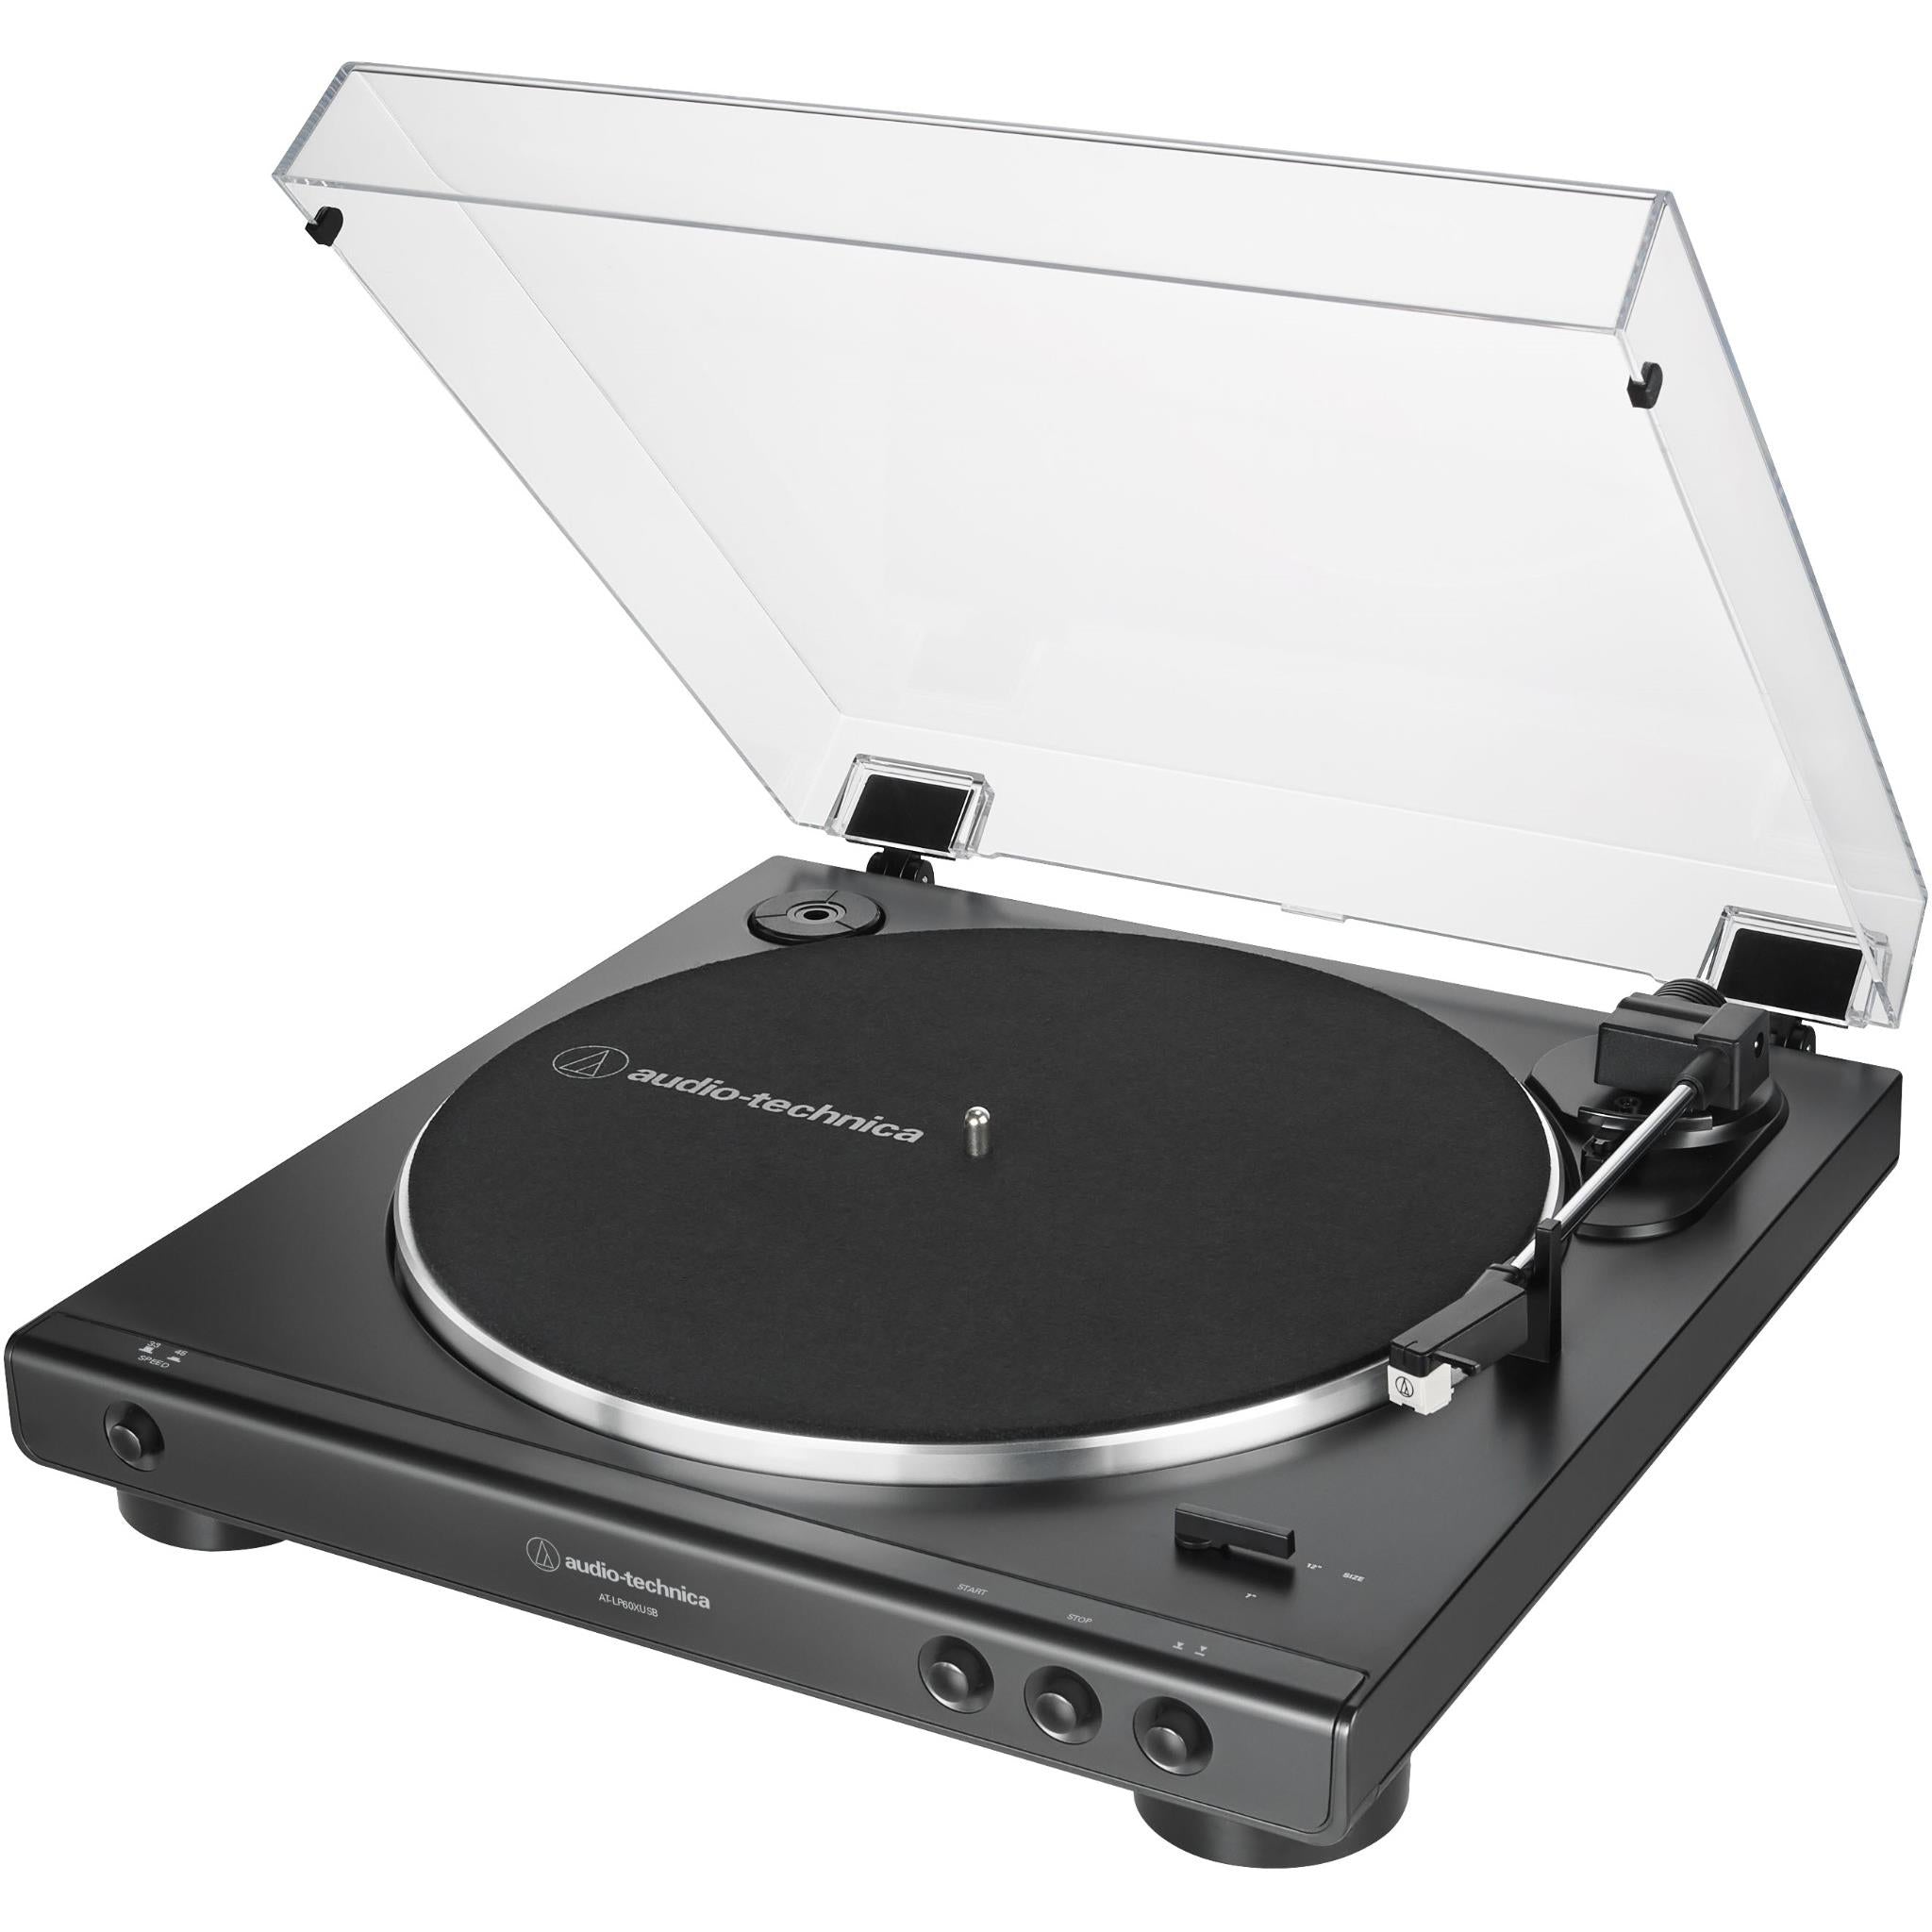 audio-technica atlp60xbt fully automatic belt drive stereo bluetooth turntable (black)